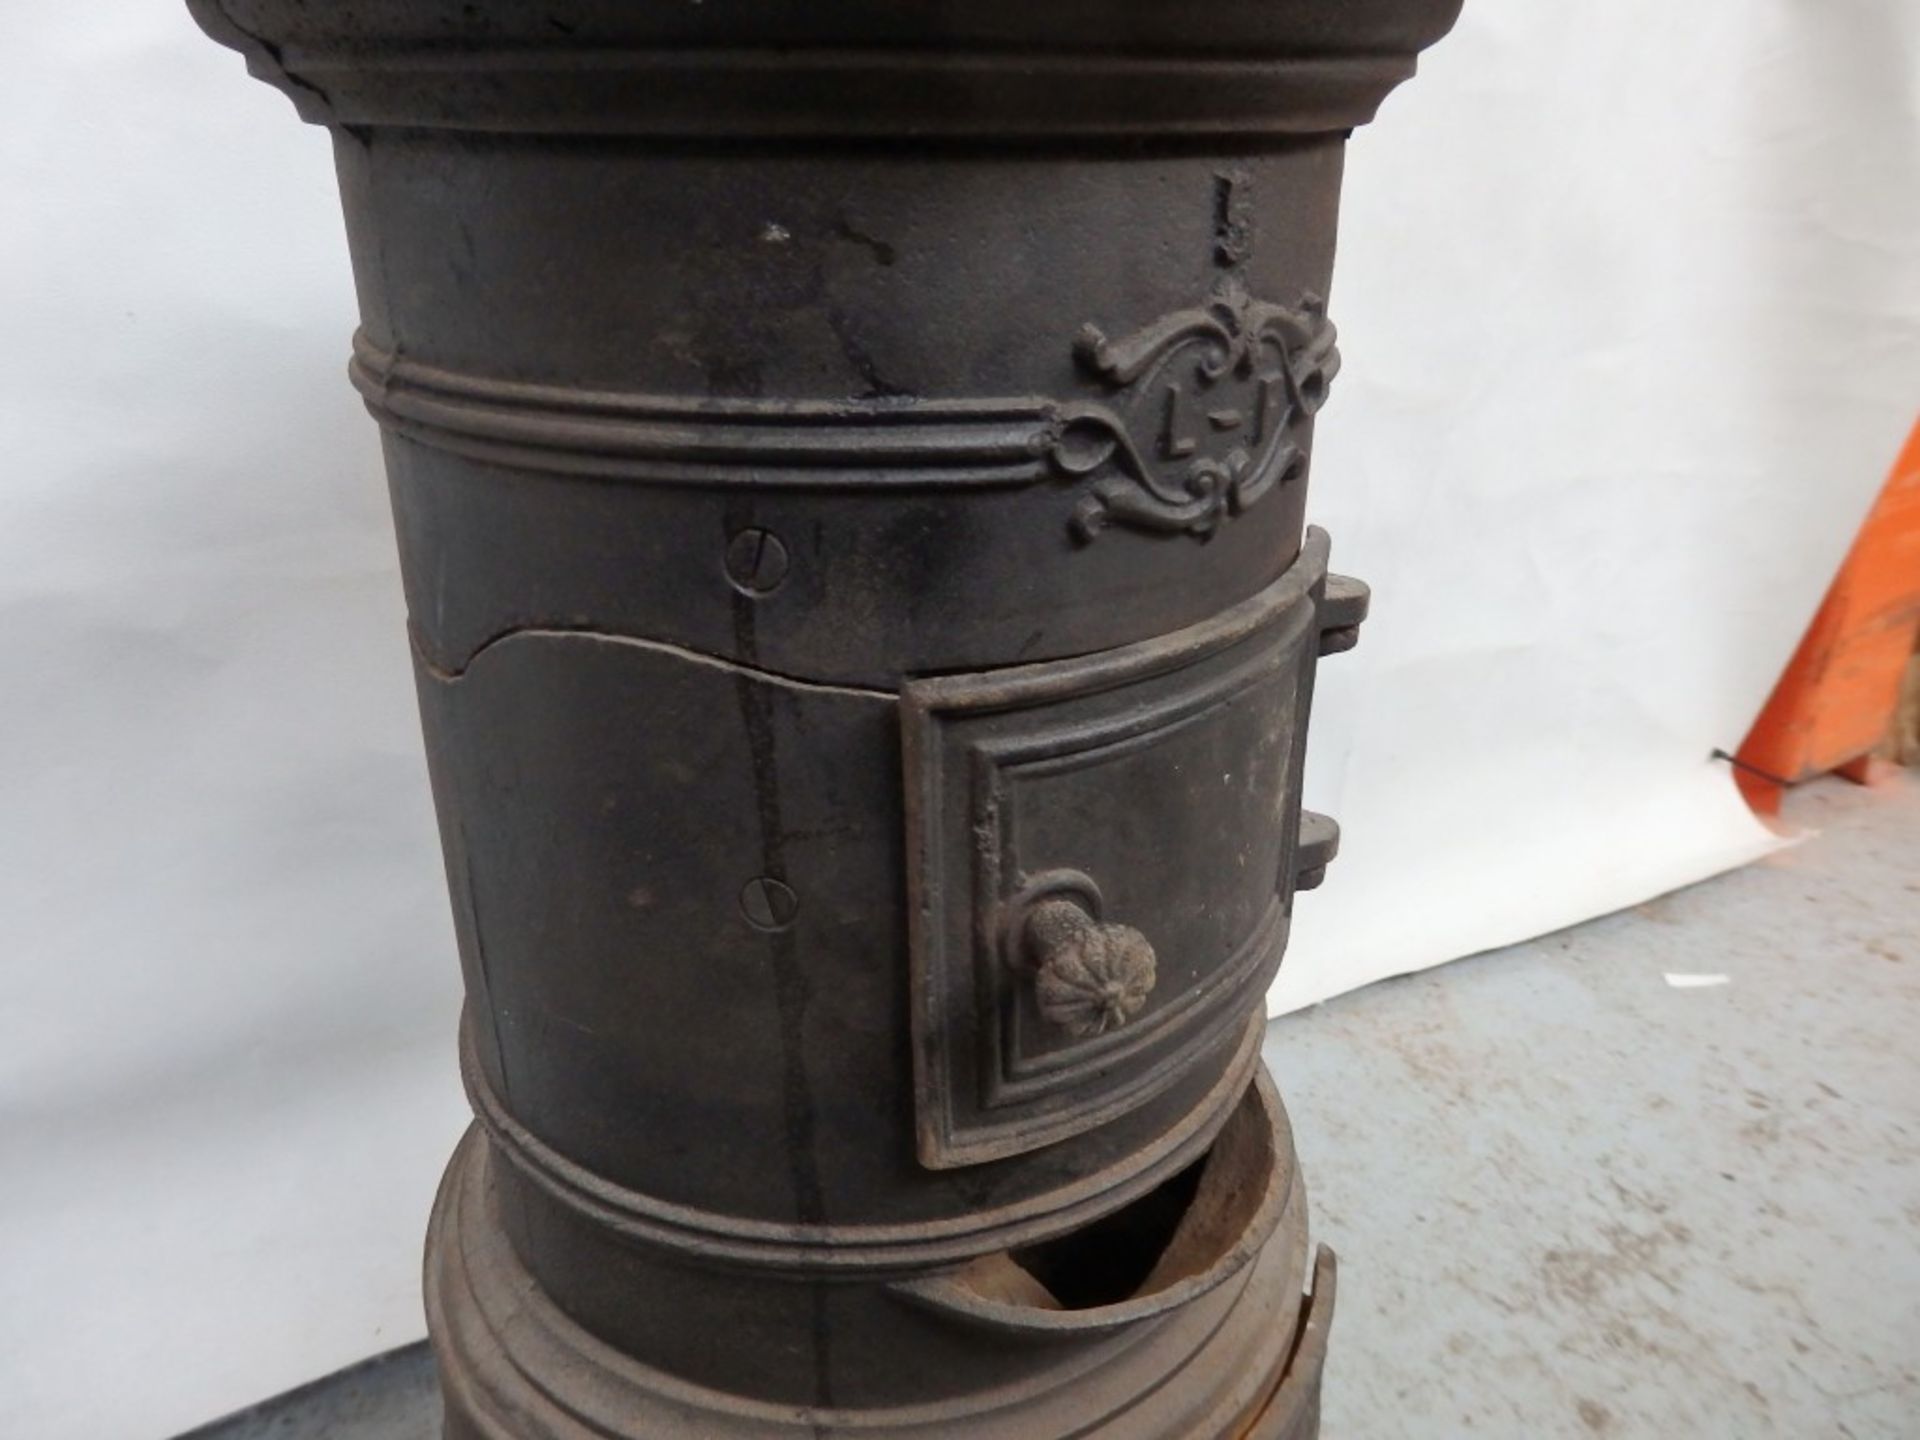 1 x Reclaimed Antique Cast Iron Potbelly Wood Burner / Stove - Dimensions: H61, Diameter 30cm - - Image 4 of 9